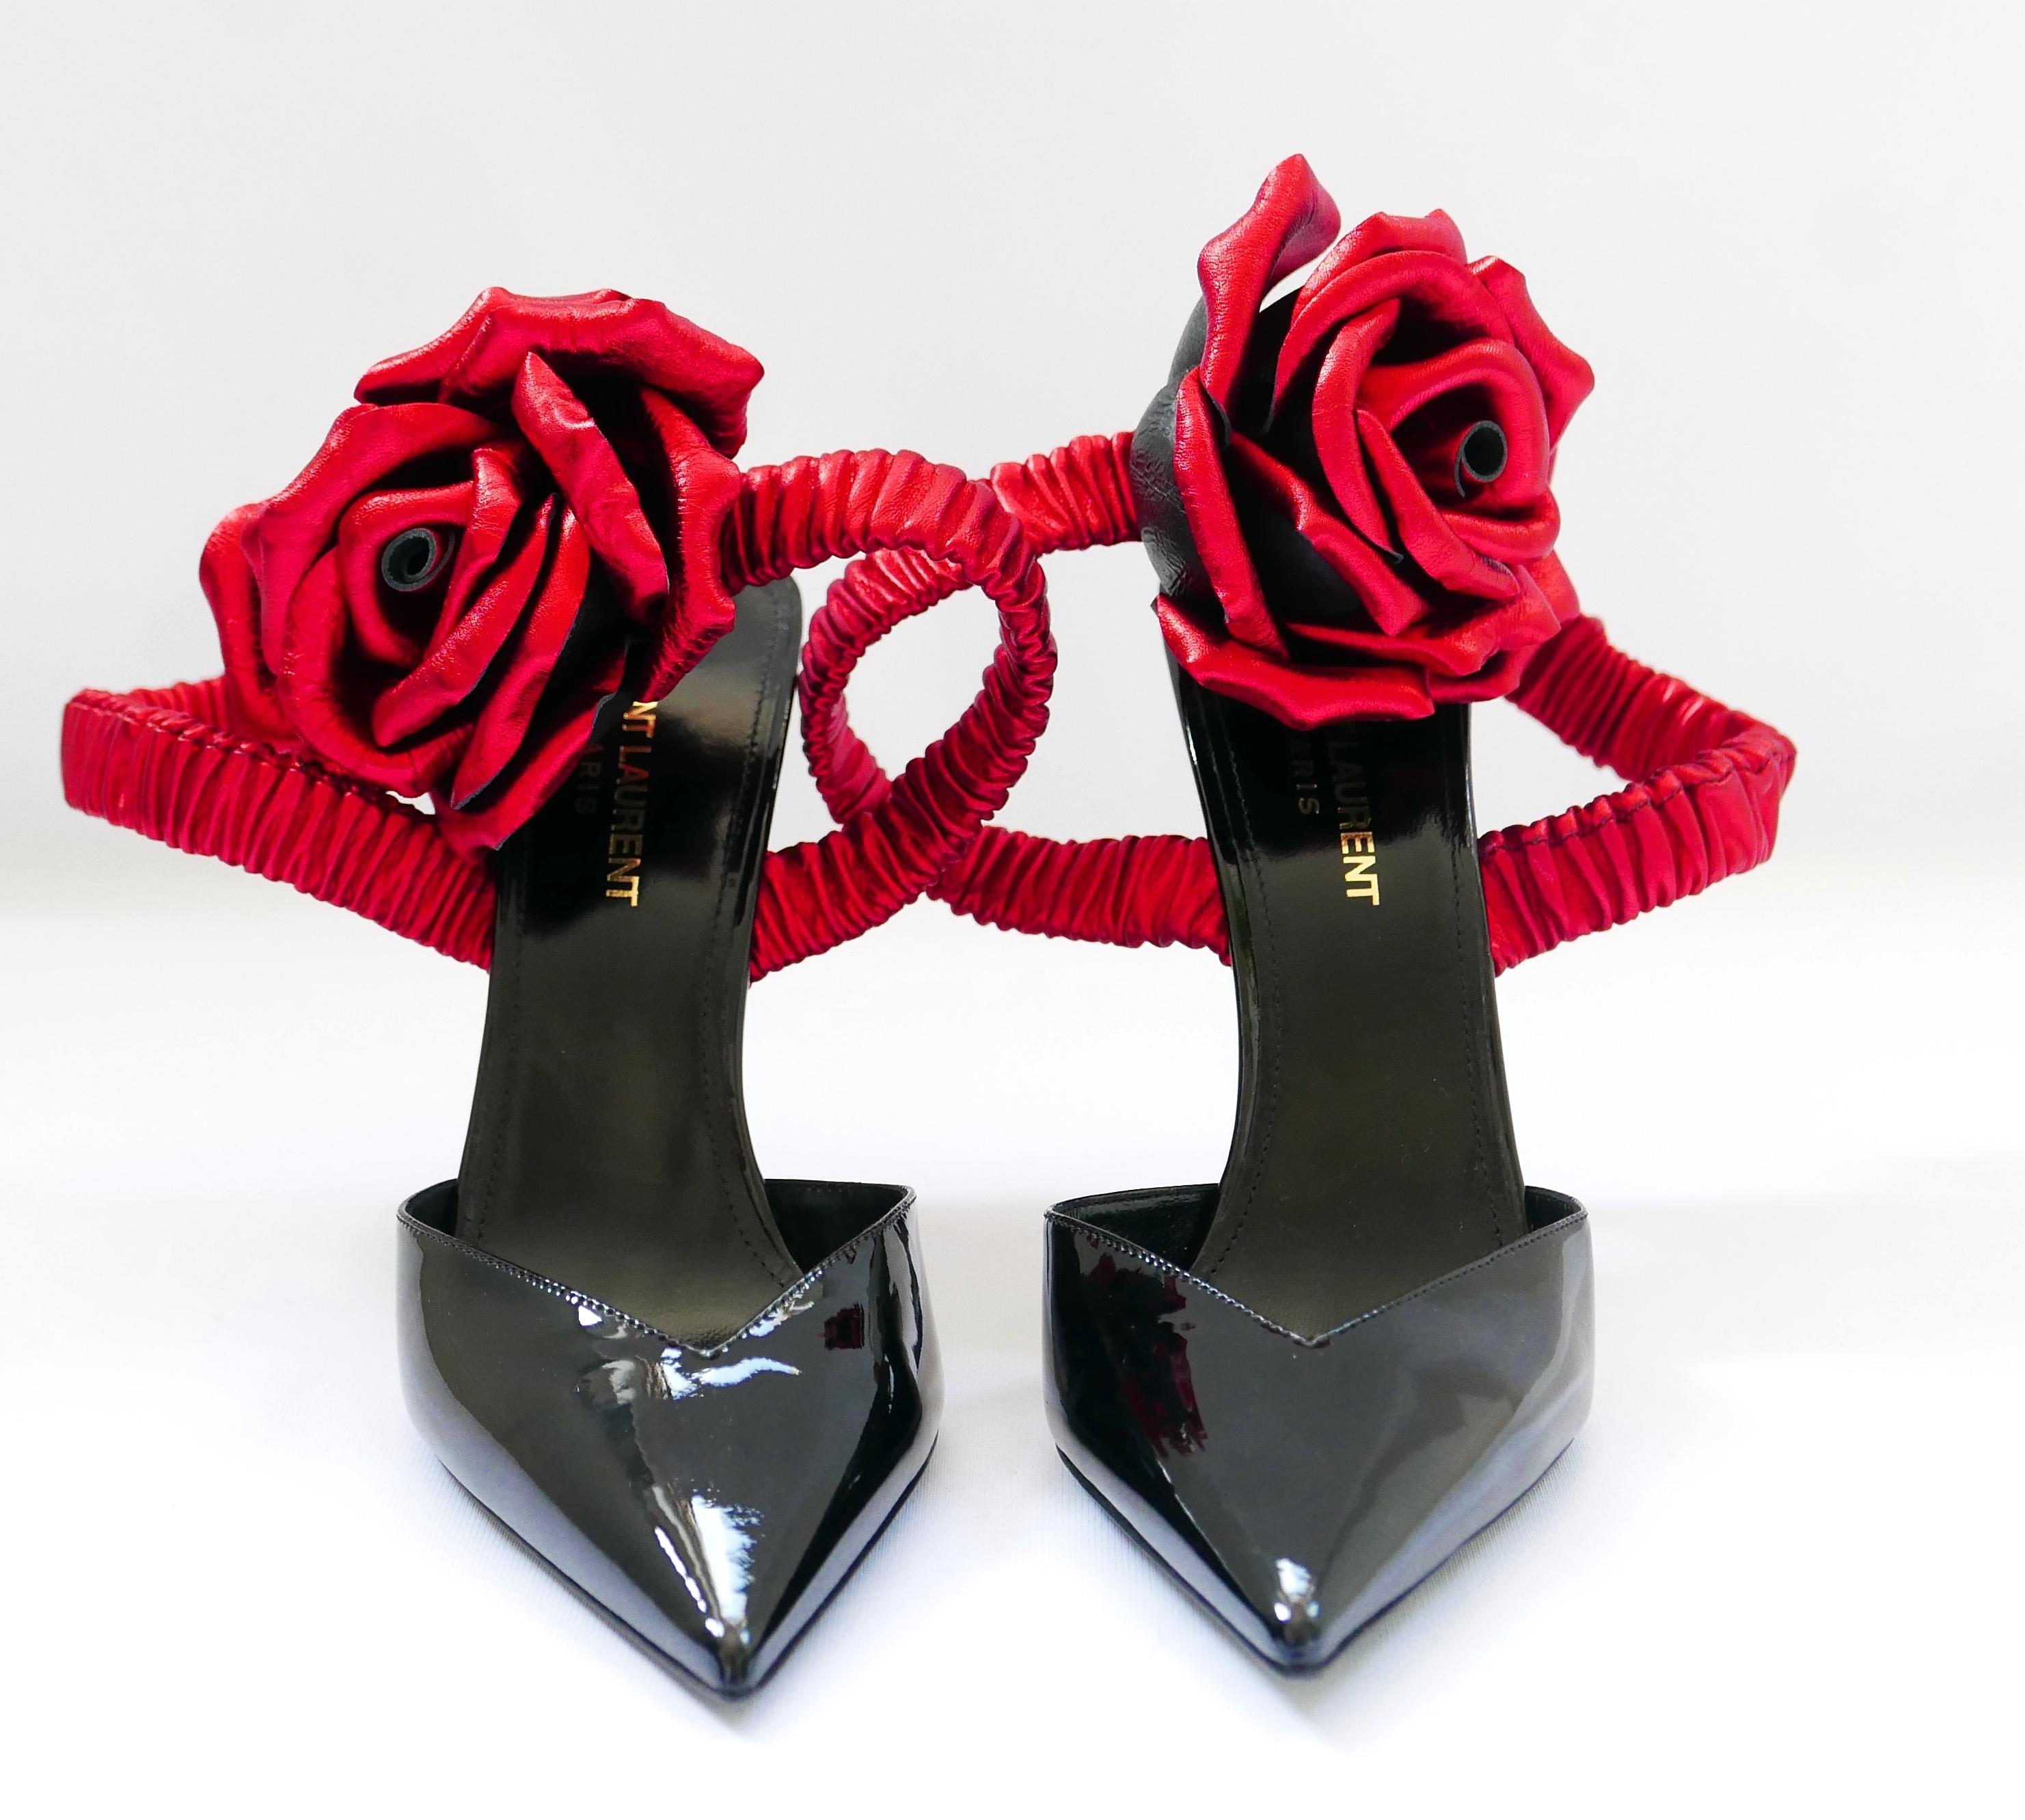 Stunning Saint Laurent Freja Rose 105 heels from the Fall 2017 runway. Look 50. Bought for £1455 and are unworn with sticker to base and large, lined layer dustbag. Superbly crafted from black patent-leather with metallic red leather elasticated